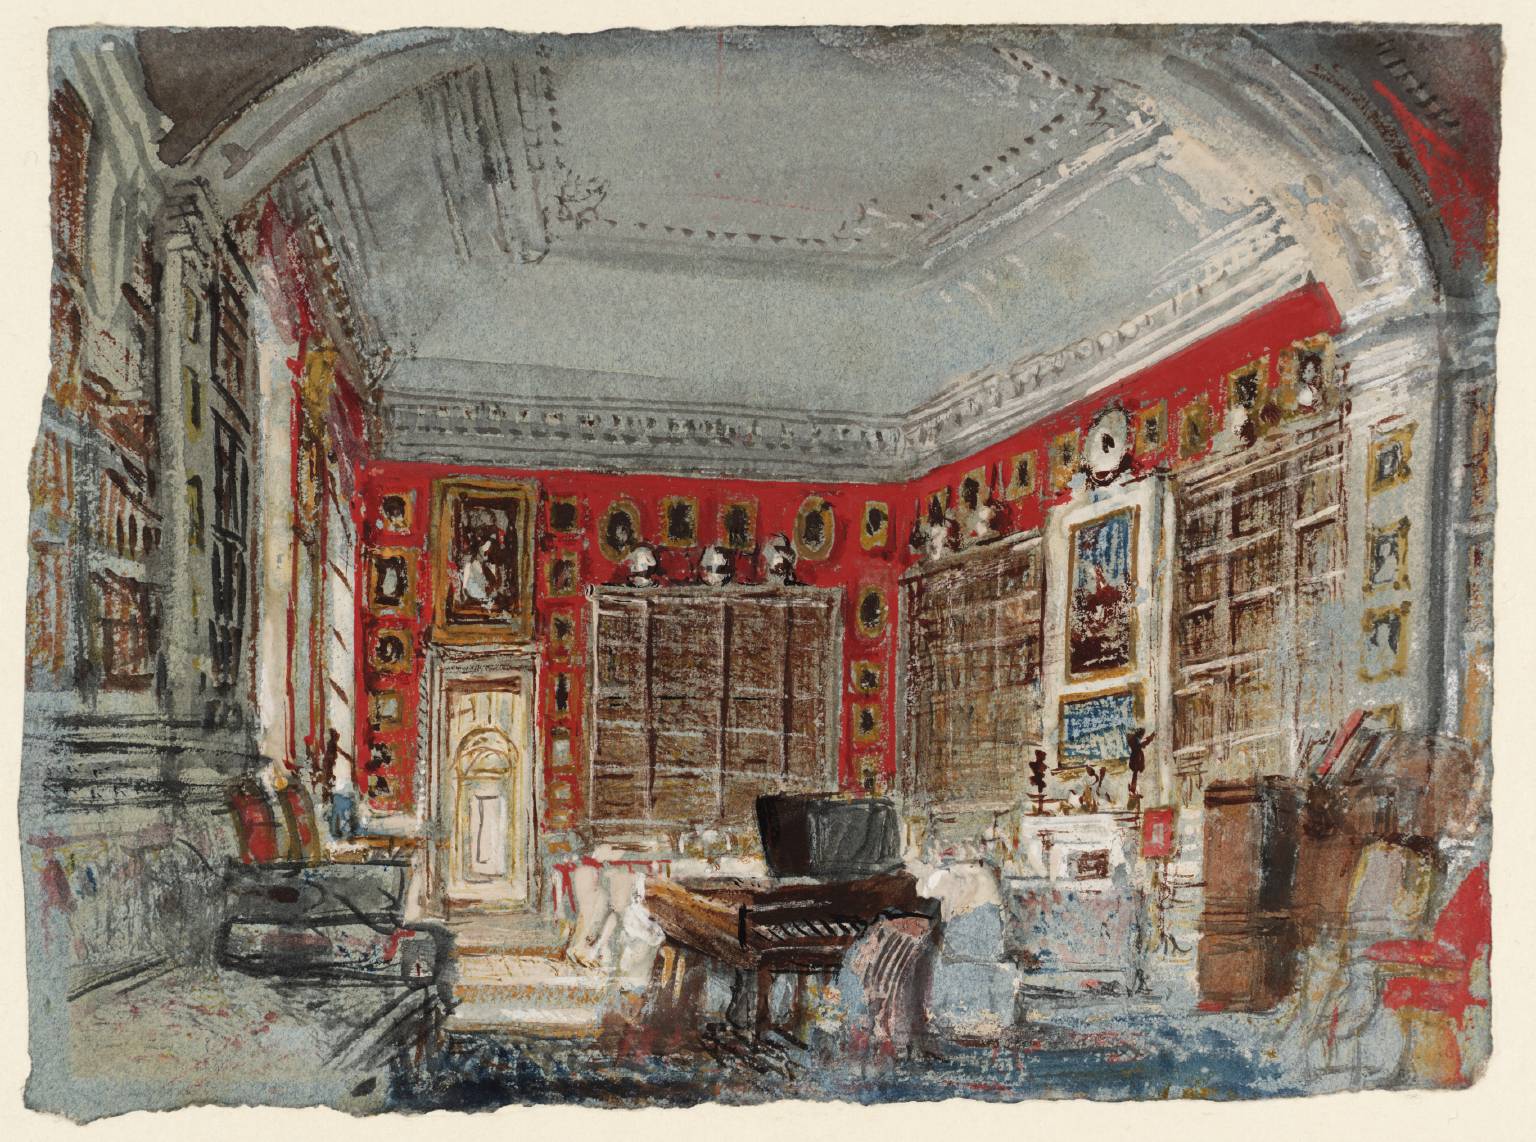 D22678: Petworth: the White Library, looking down the Enfilade from the Alcove, 1827